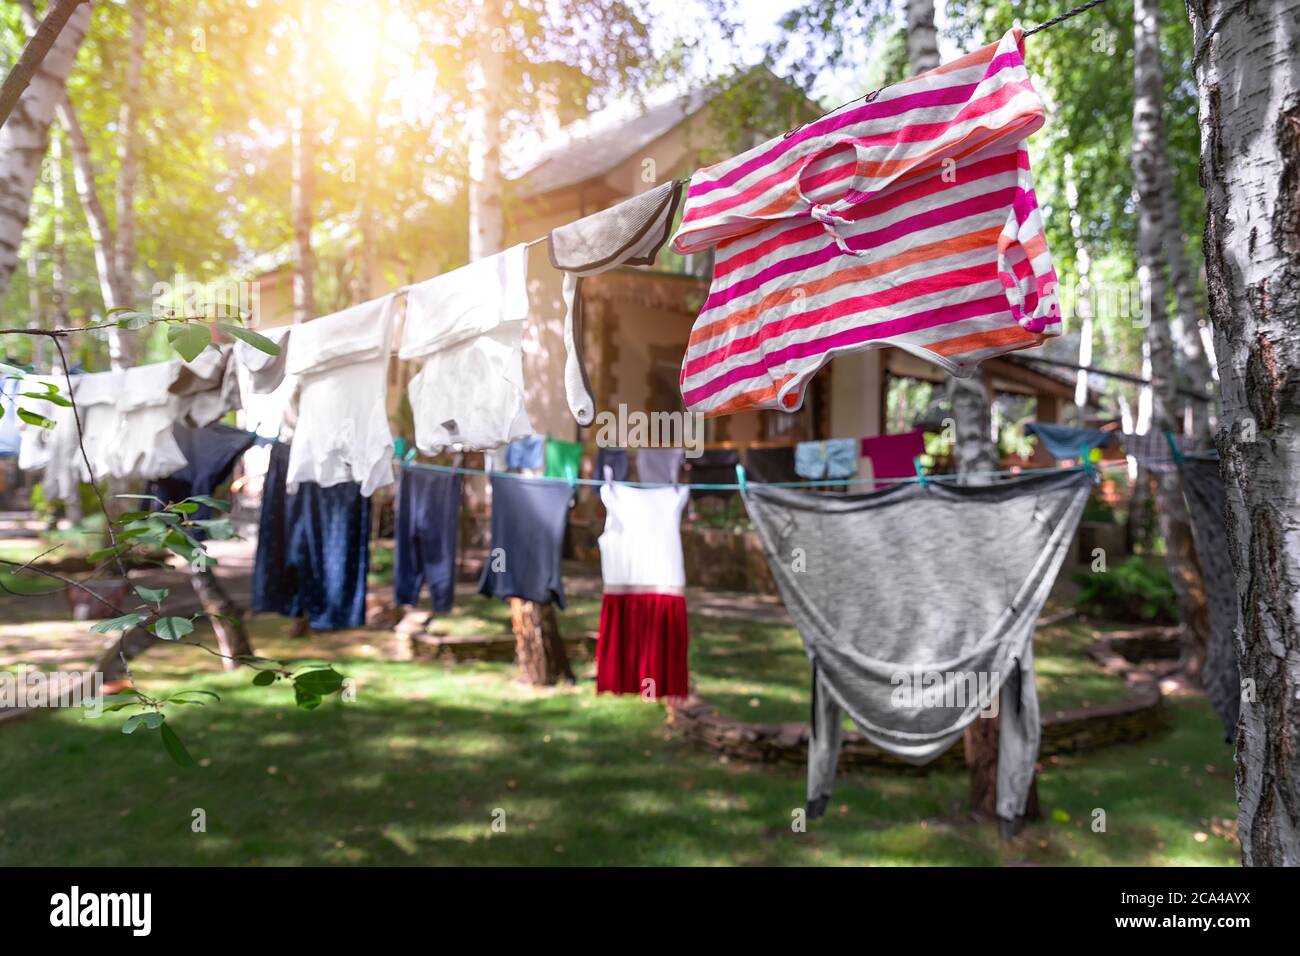 Clothes Hanging On Rural Clothesline High Resolution Stock Photography ...